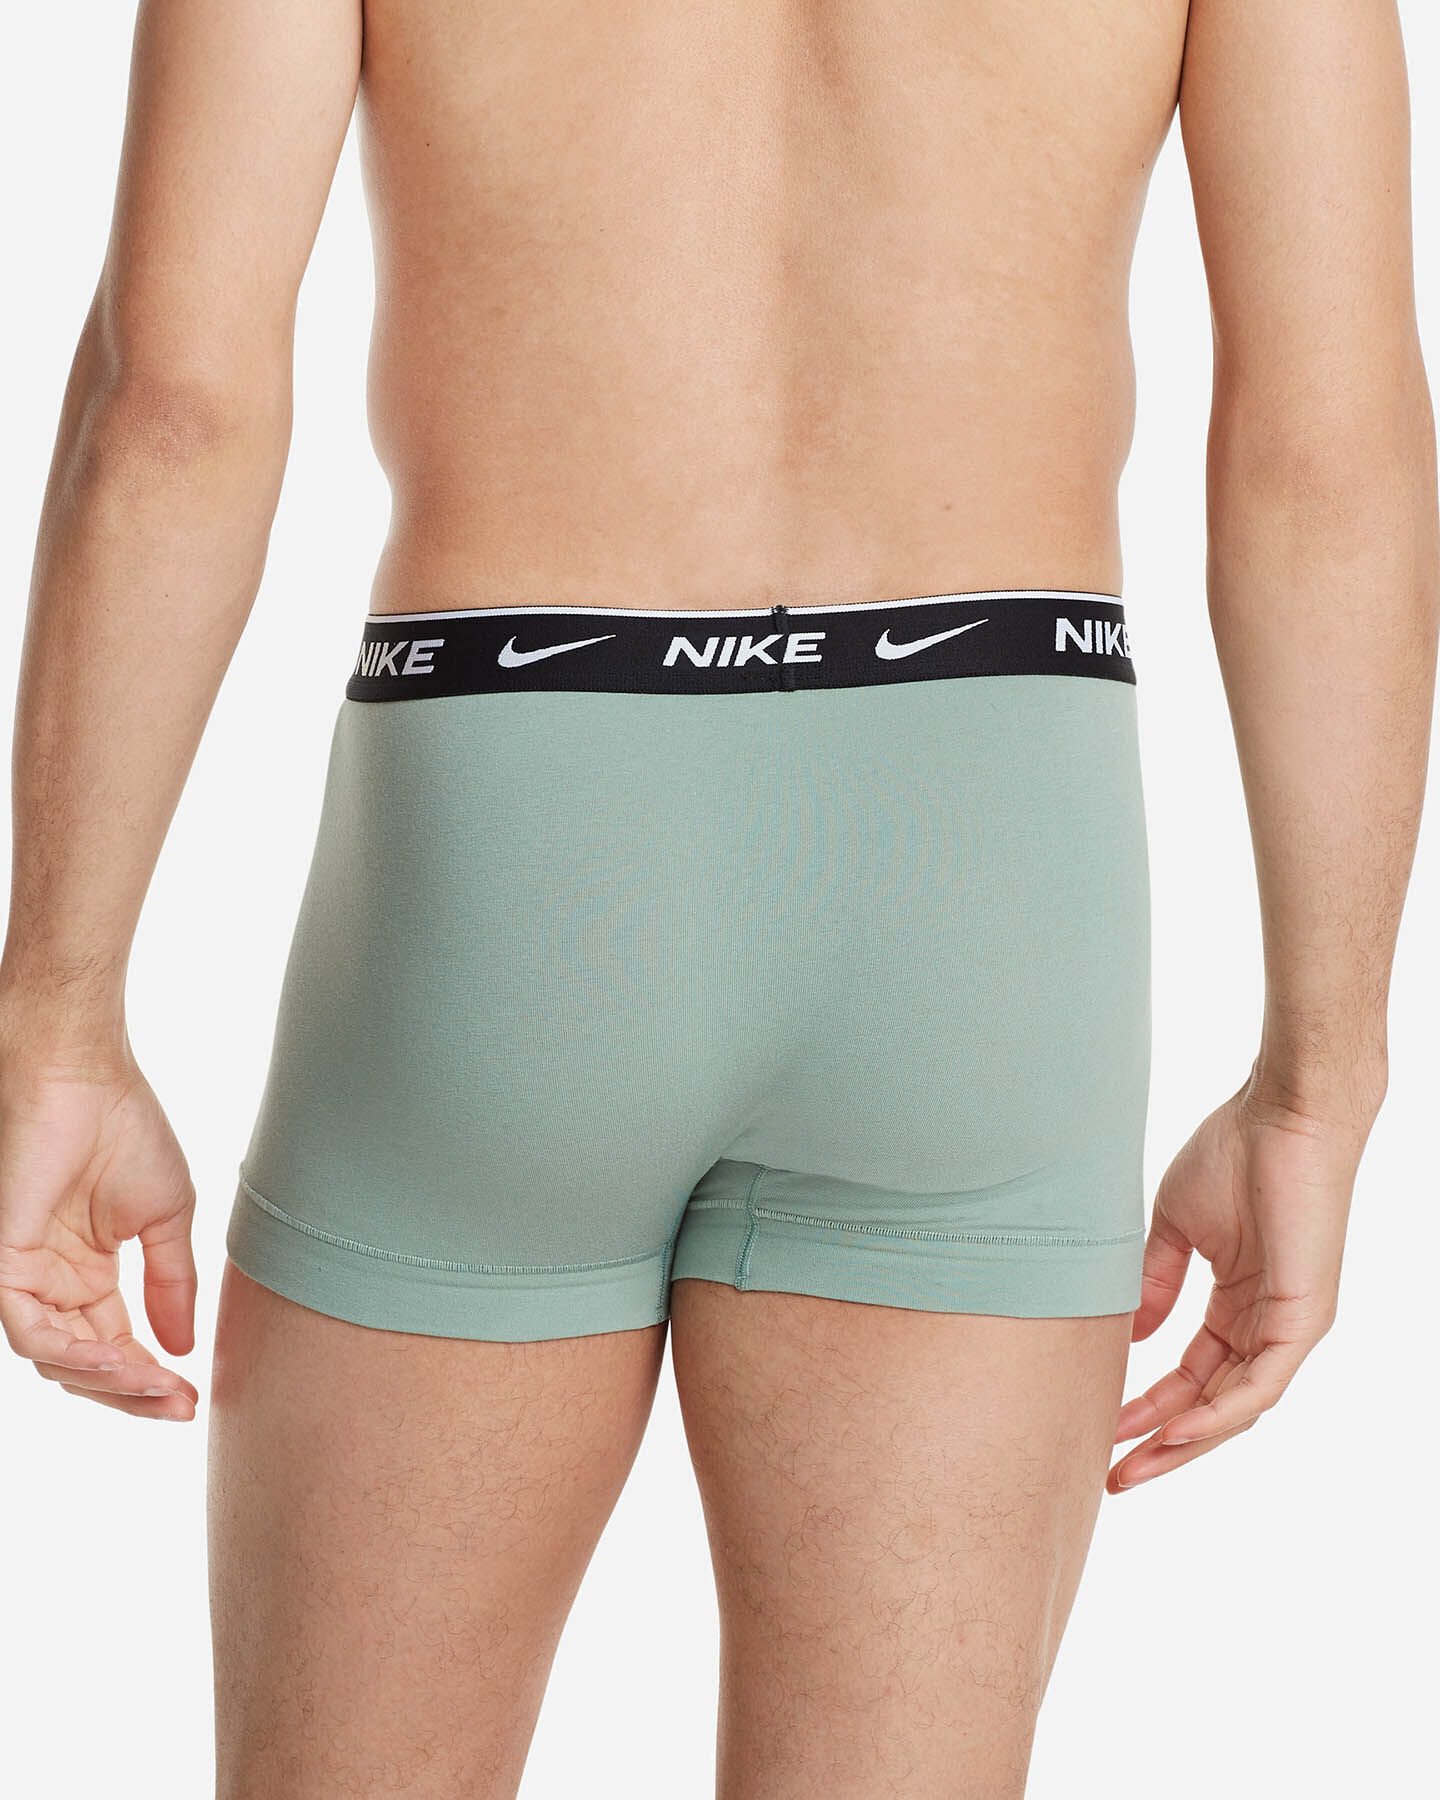  Intimo NIKE 3PACK BOXER EVERYDAY M S4099881|KUS|L scatto 3